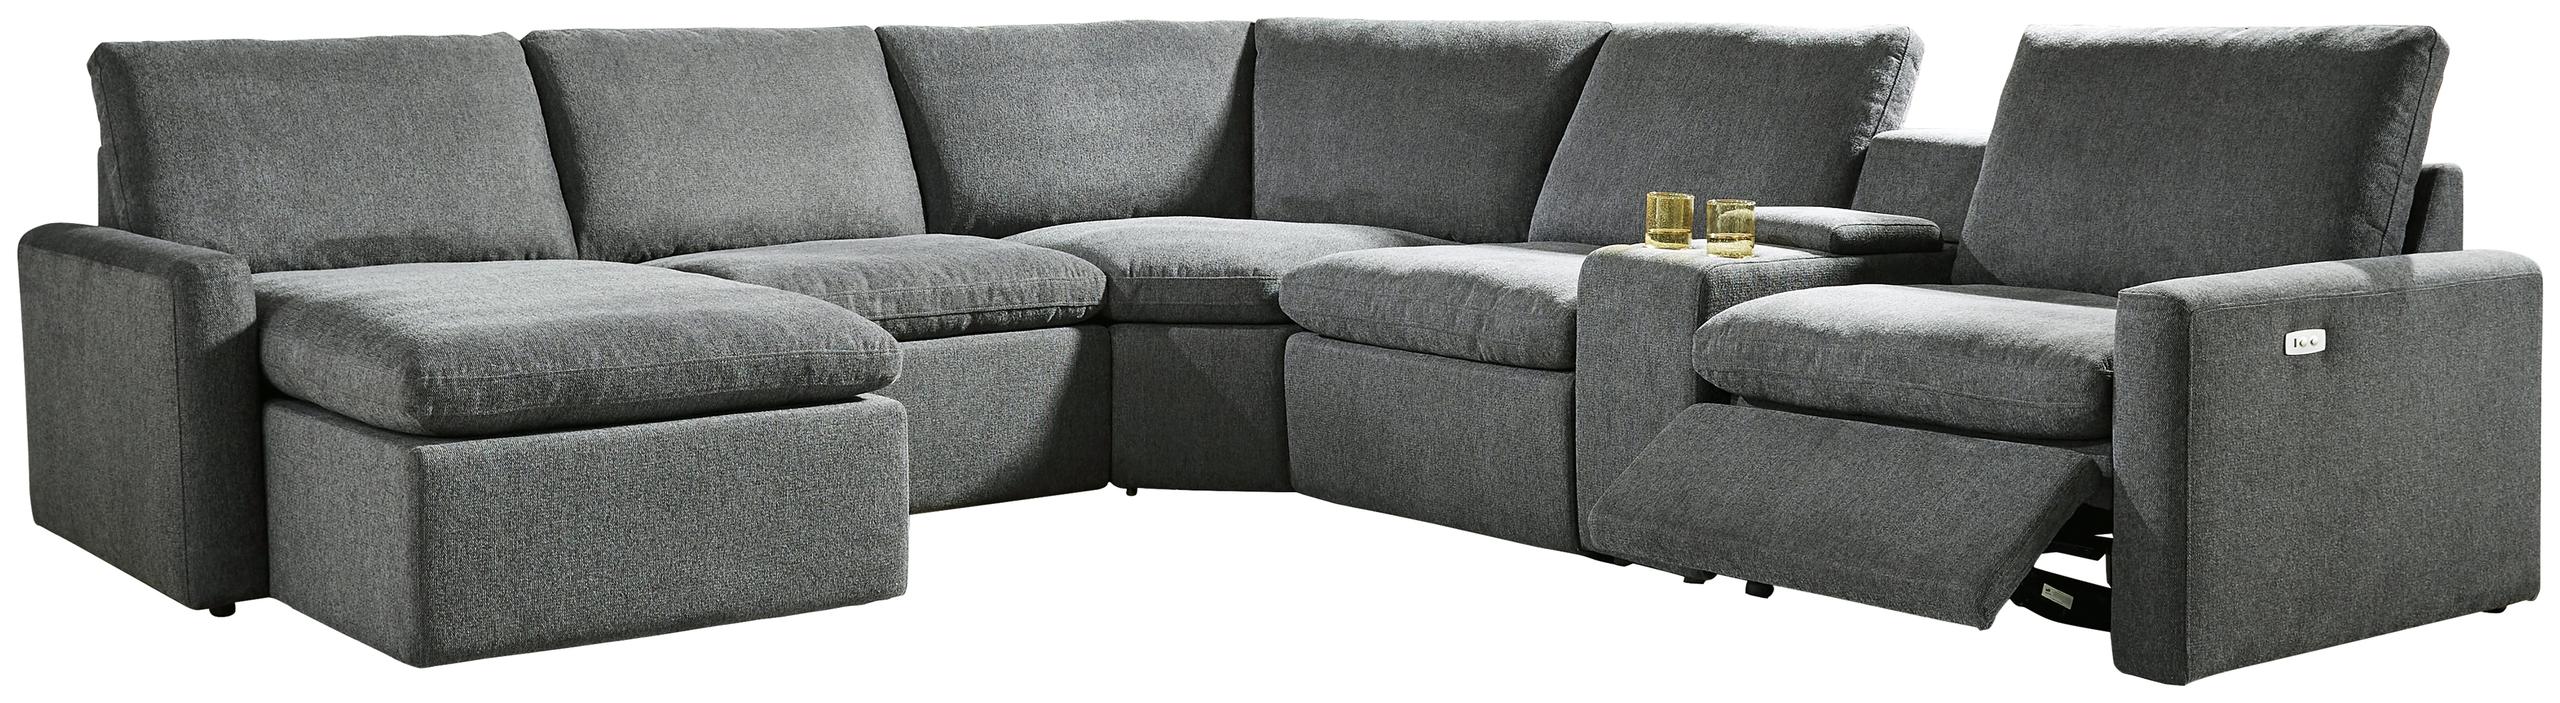 ASHLEY FURNITURE 60508S7 Hartsdale 6-piece Left Arm Facing Reclining Sectional With Console and Chaise